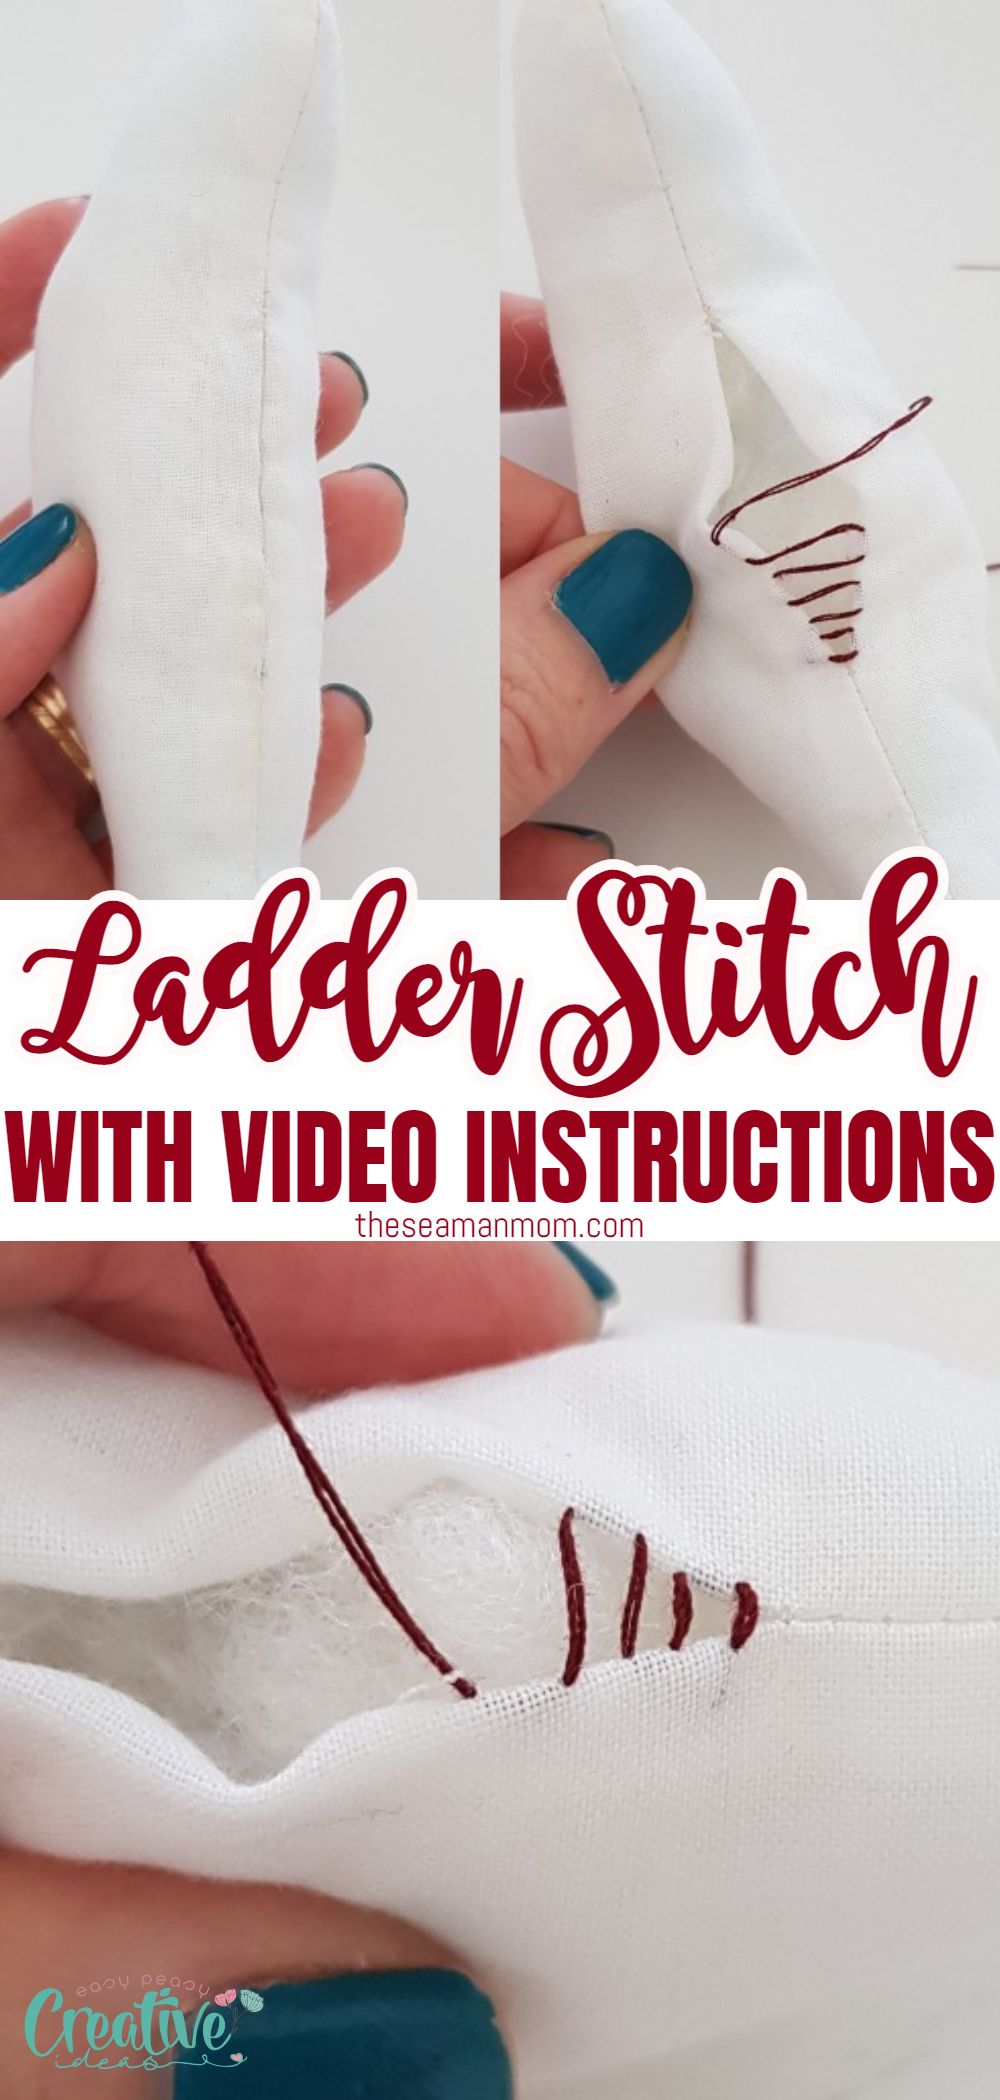 Learn how to do an invisible hand stitch, also known as slip stitch or blind stitch with this super easy ladder stitch tutorial. This hand-sewing technique is super simple to stitch, and with just a tiny bit of practice, it gives a neat, tidy seam every time! via @petroneagu